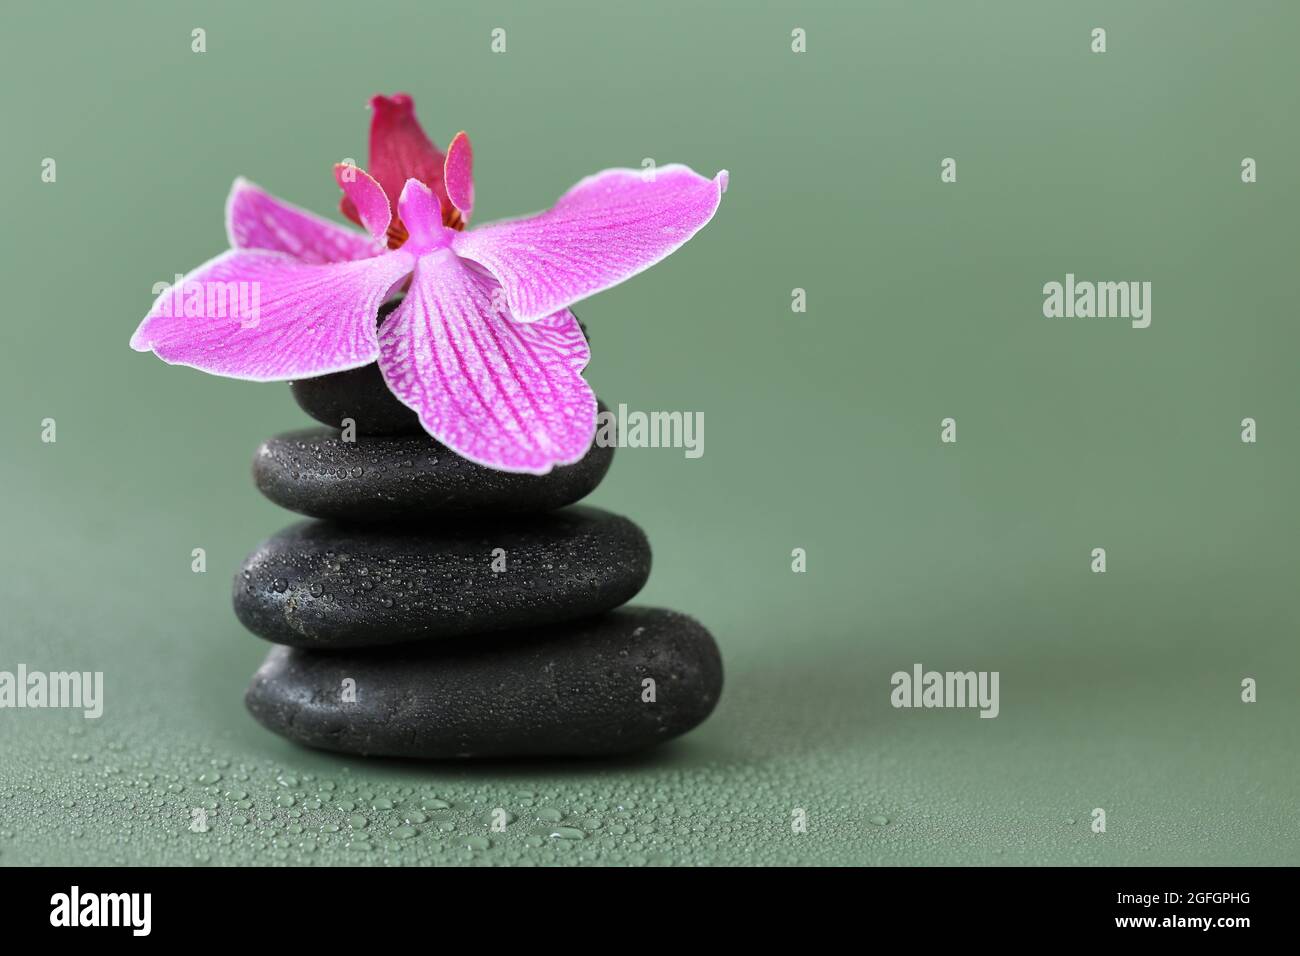 Spa Stones and Orchid Flower. Massage Stone.Beauty and harmony. Black stones and pink orchid flower in water drops  Stock Photo